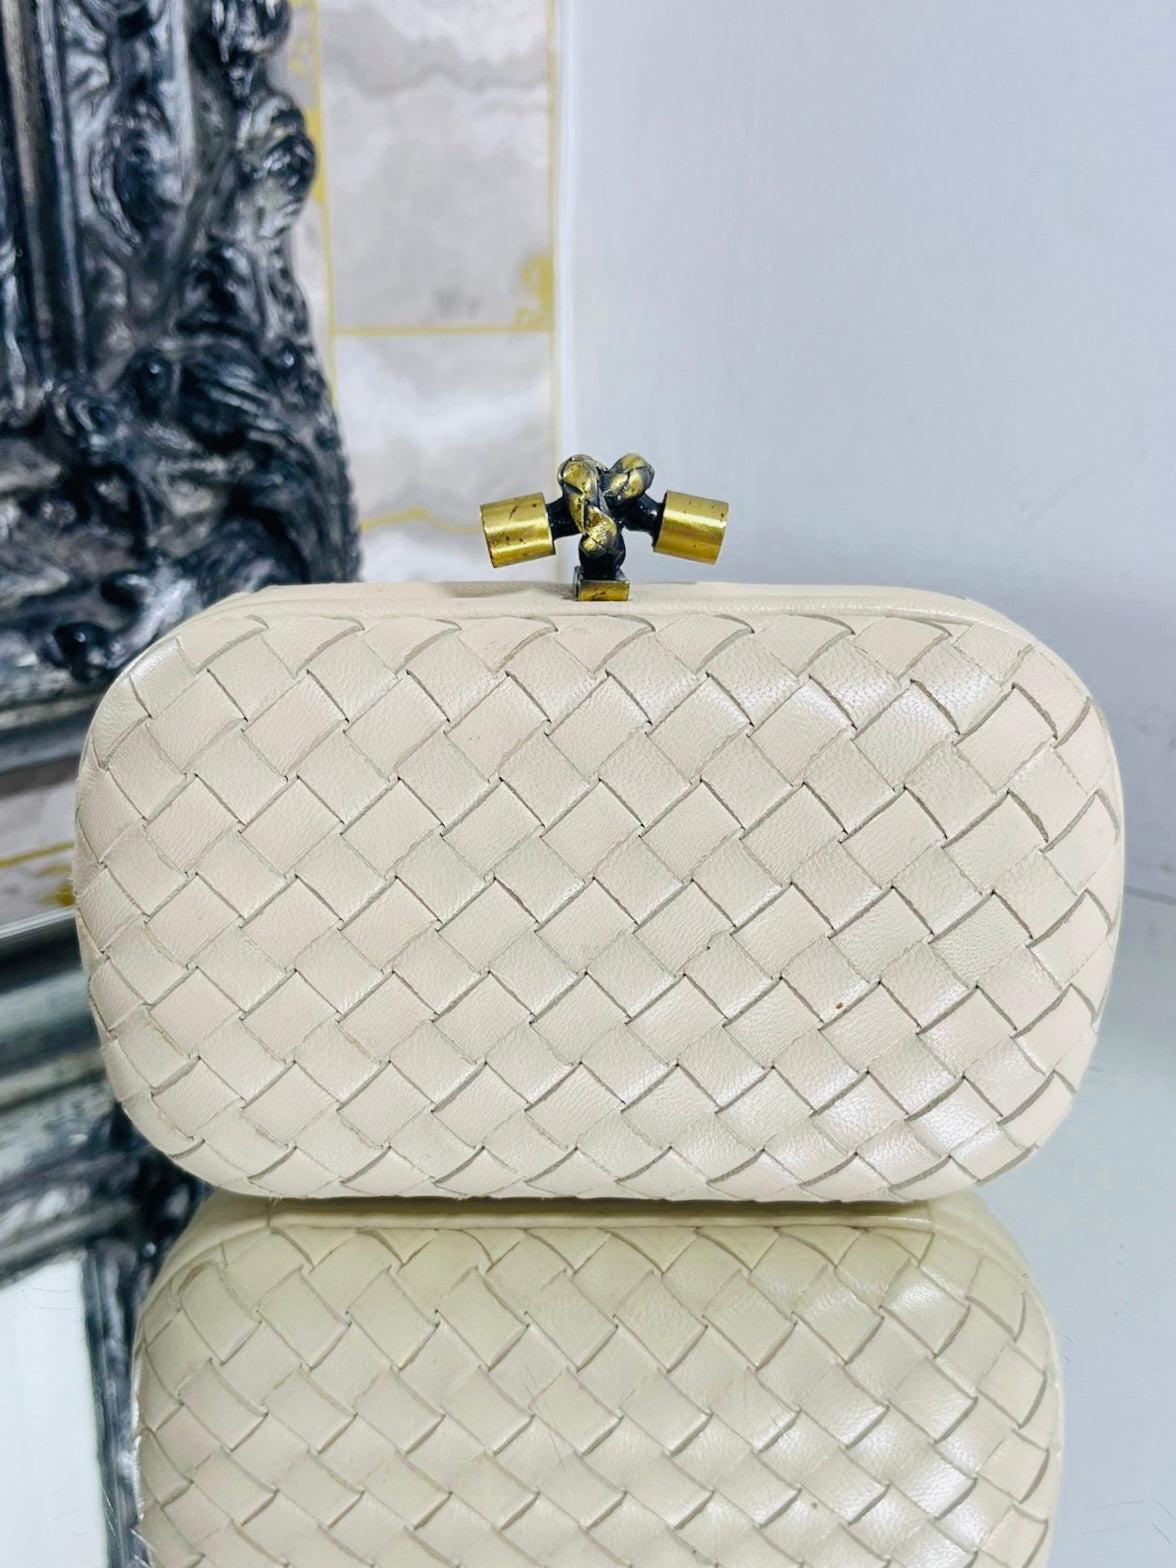 Bottega Veneta Leather Top Knot Clutch Bag

Ivory leather clutch bag designed with the brand's signature Intrecciato weave crafted Featuring signature knot twisted closure with antique gold engraved logo.

Size – Height 10cm, Width 16cm, Depth